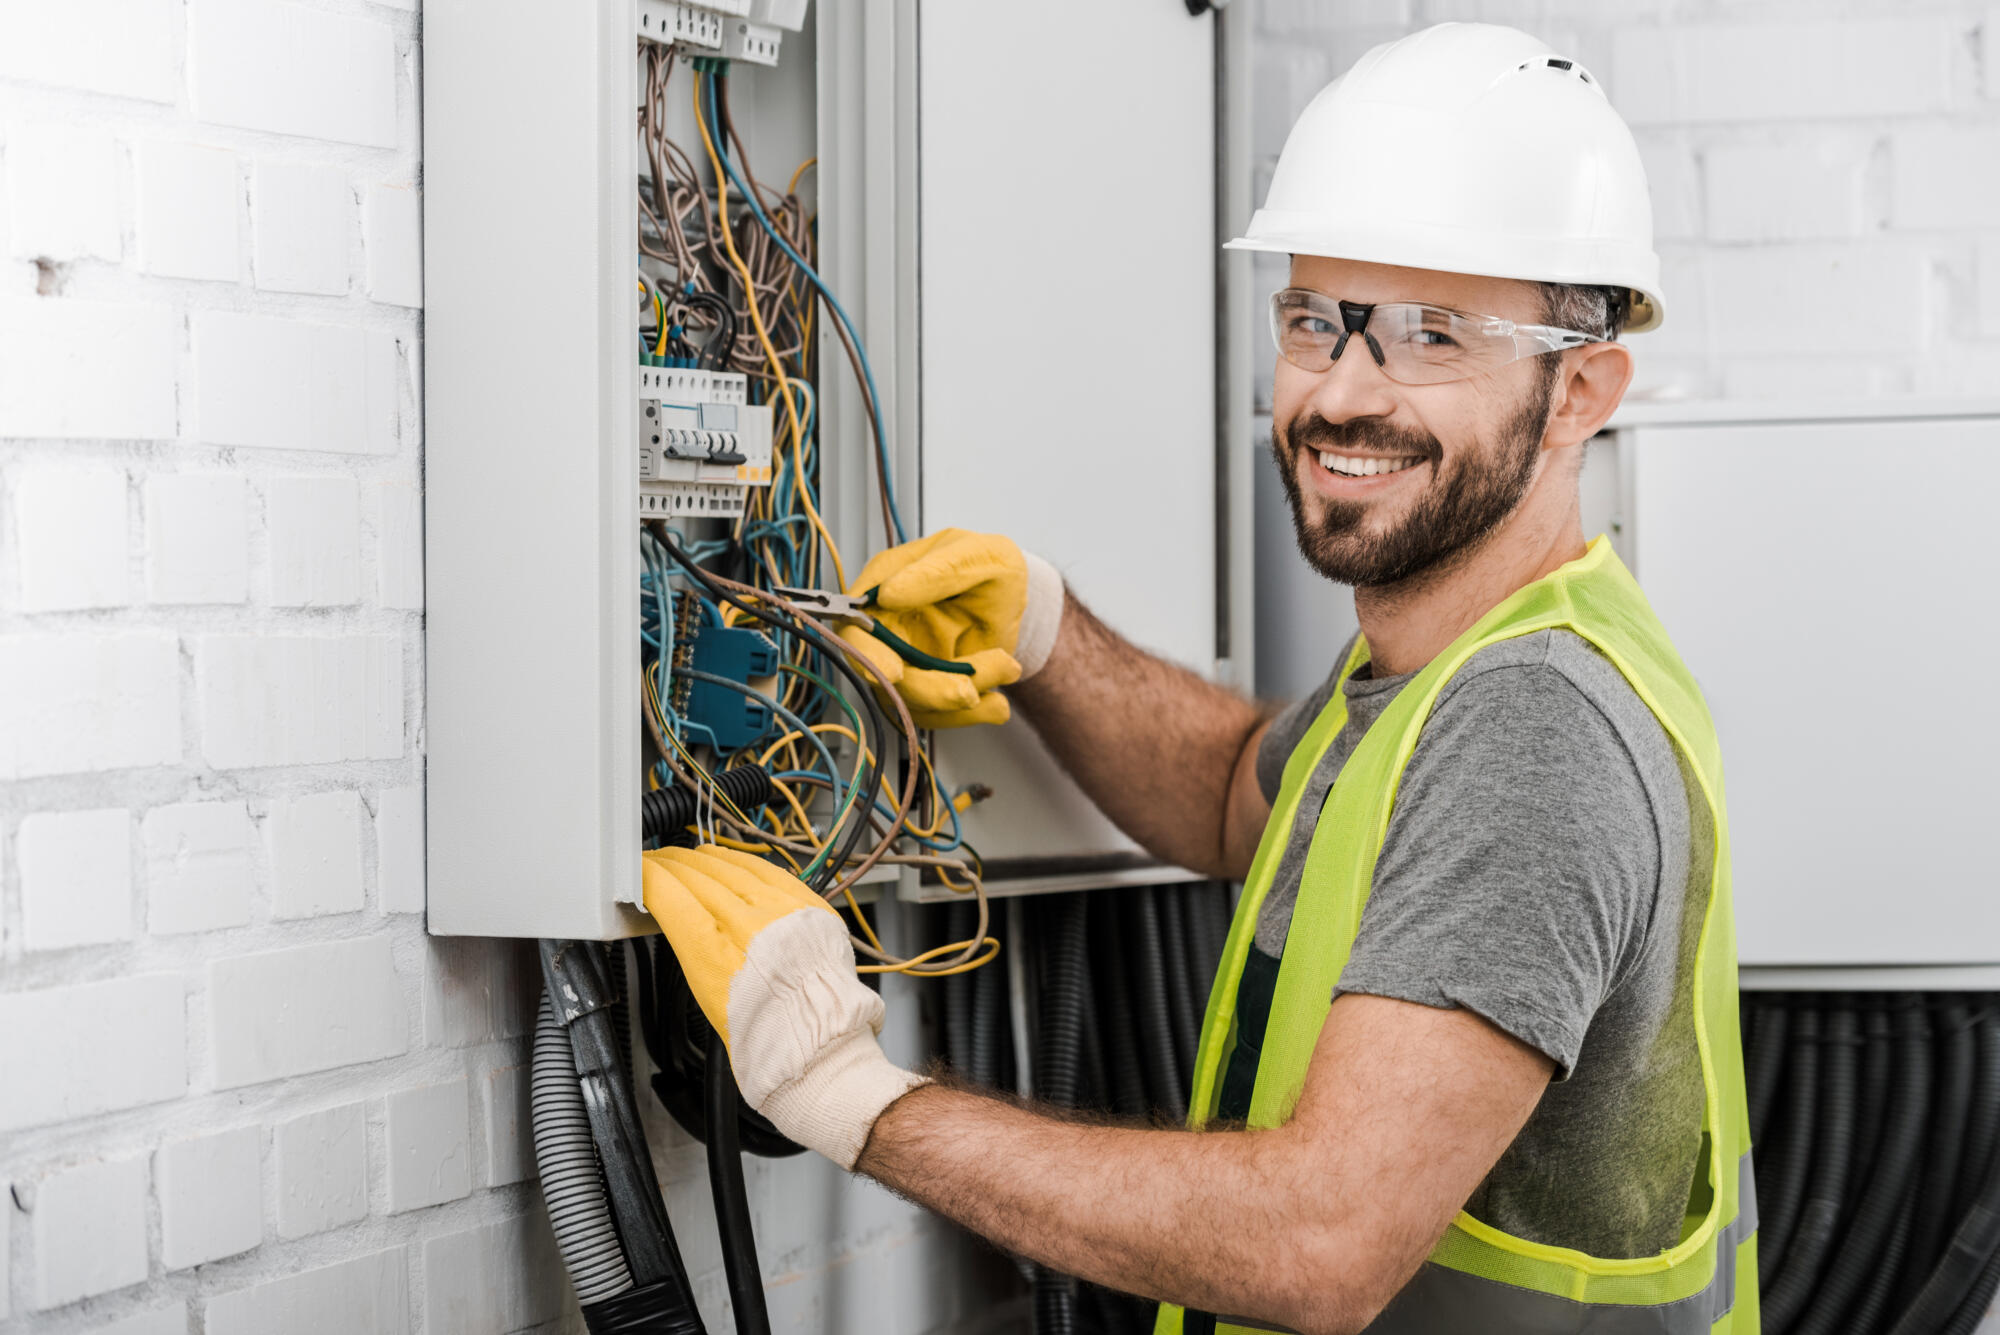 An electrician is working on an electrical panel.